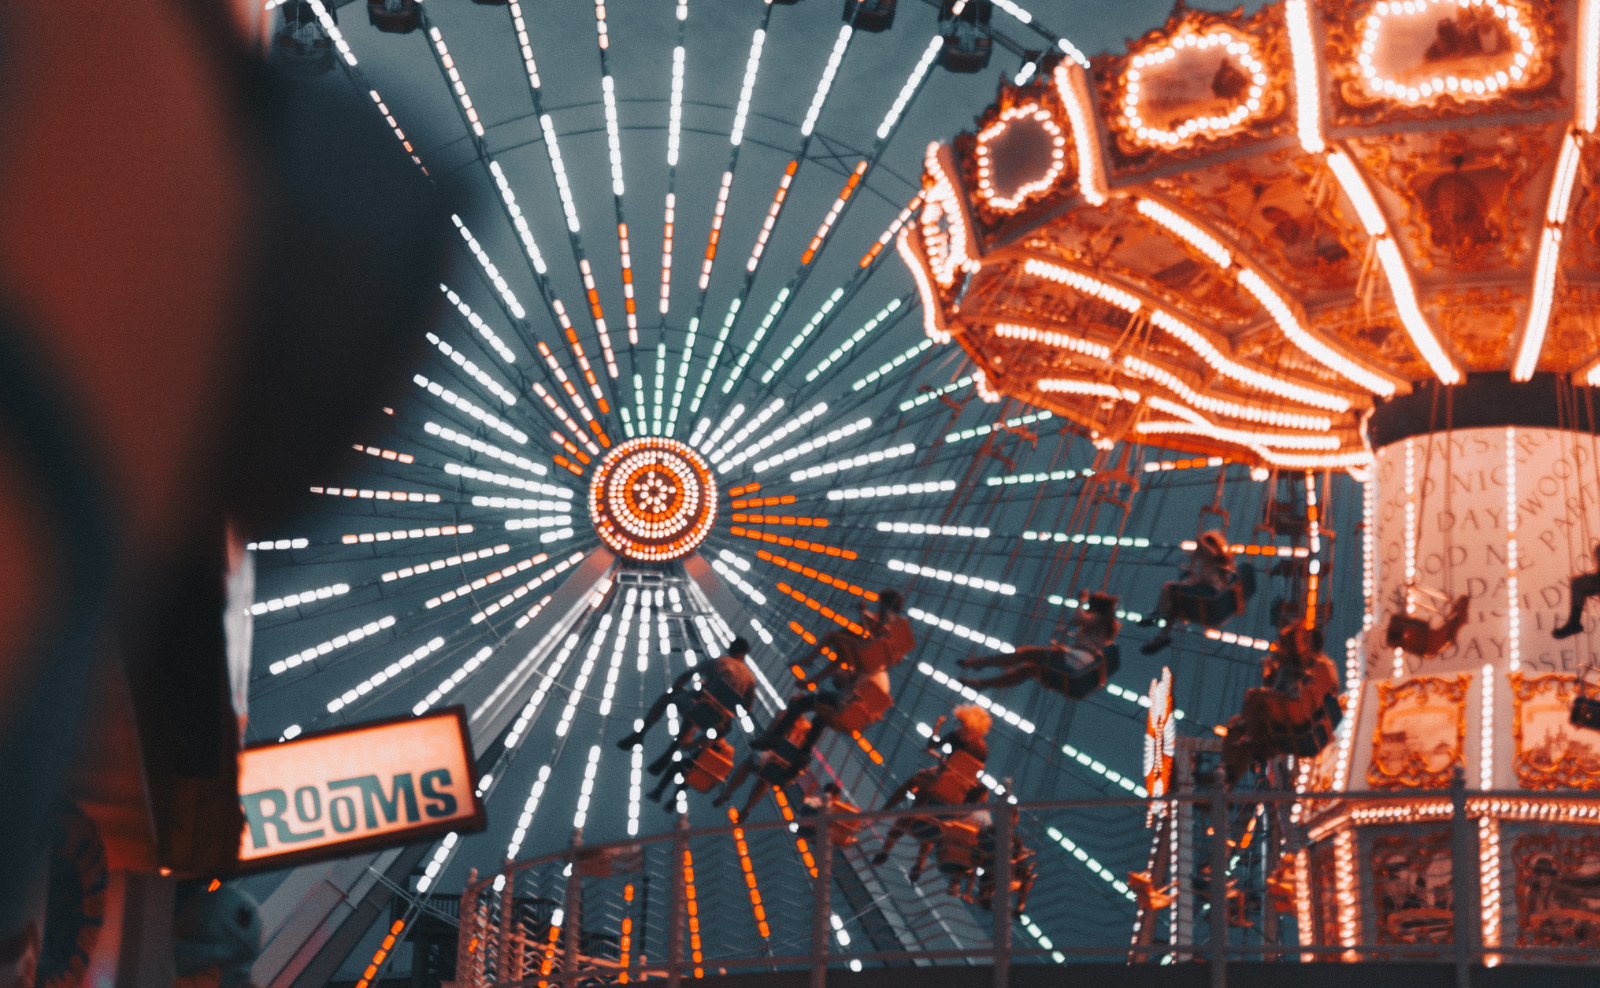 a swing ride and a ferris wheel lit up with white, blue, and orange lights at night